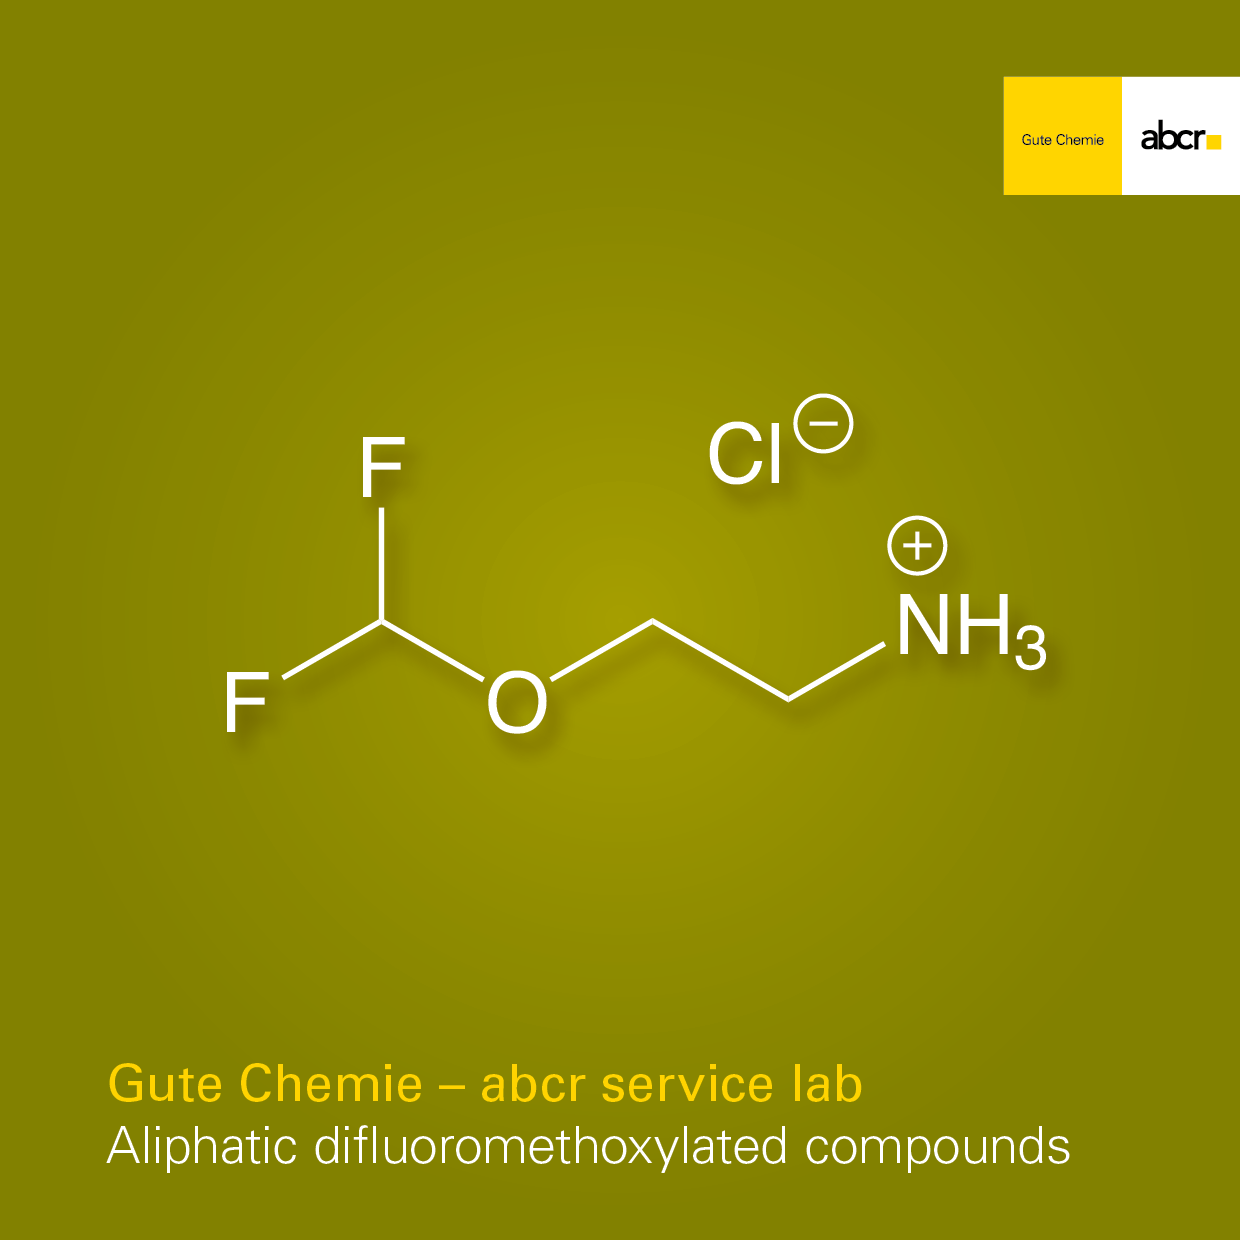 Aliphatic difluoromethoxylated compounds - abcr service lab